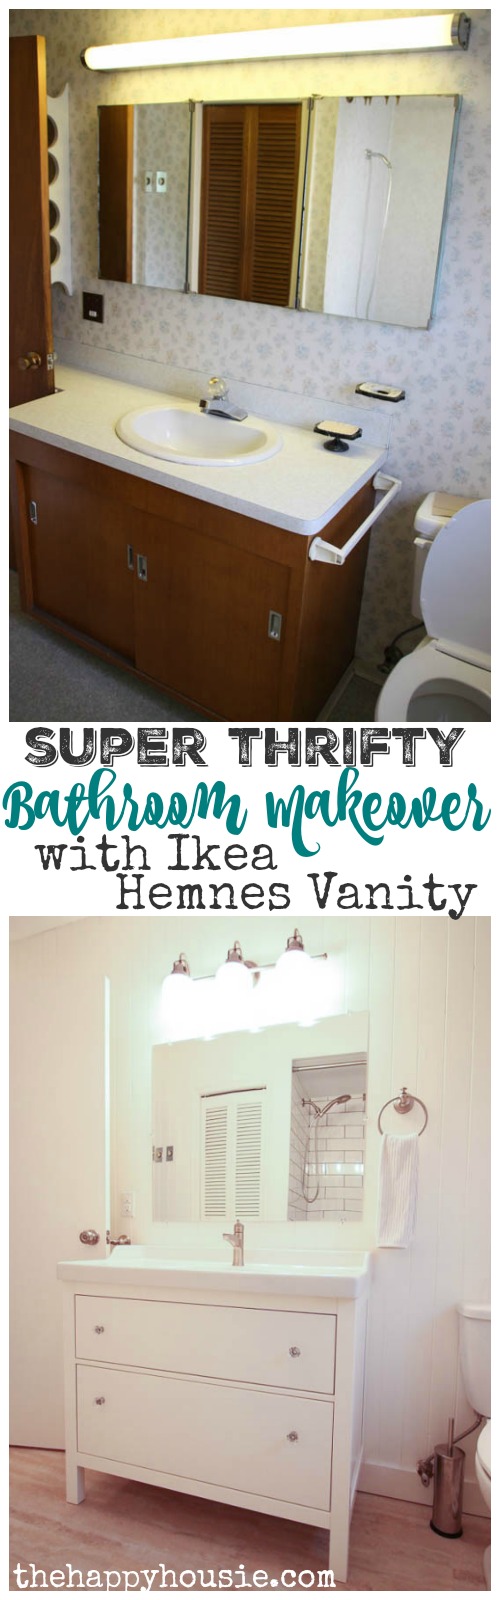 Thrifty Bathroom Makeover With An Ikea Hemnes Vanity The Happy Housie,Colorful Optical Illusions Wallpaper